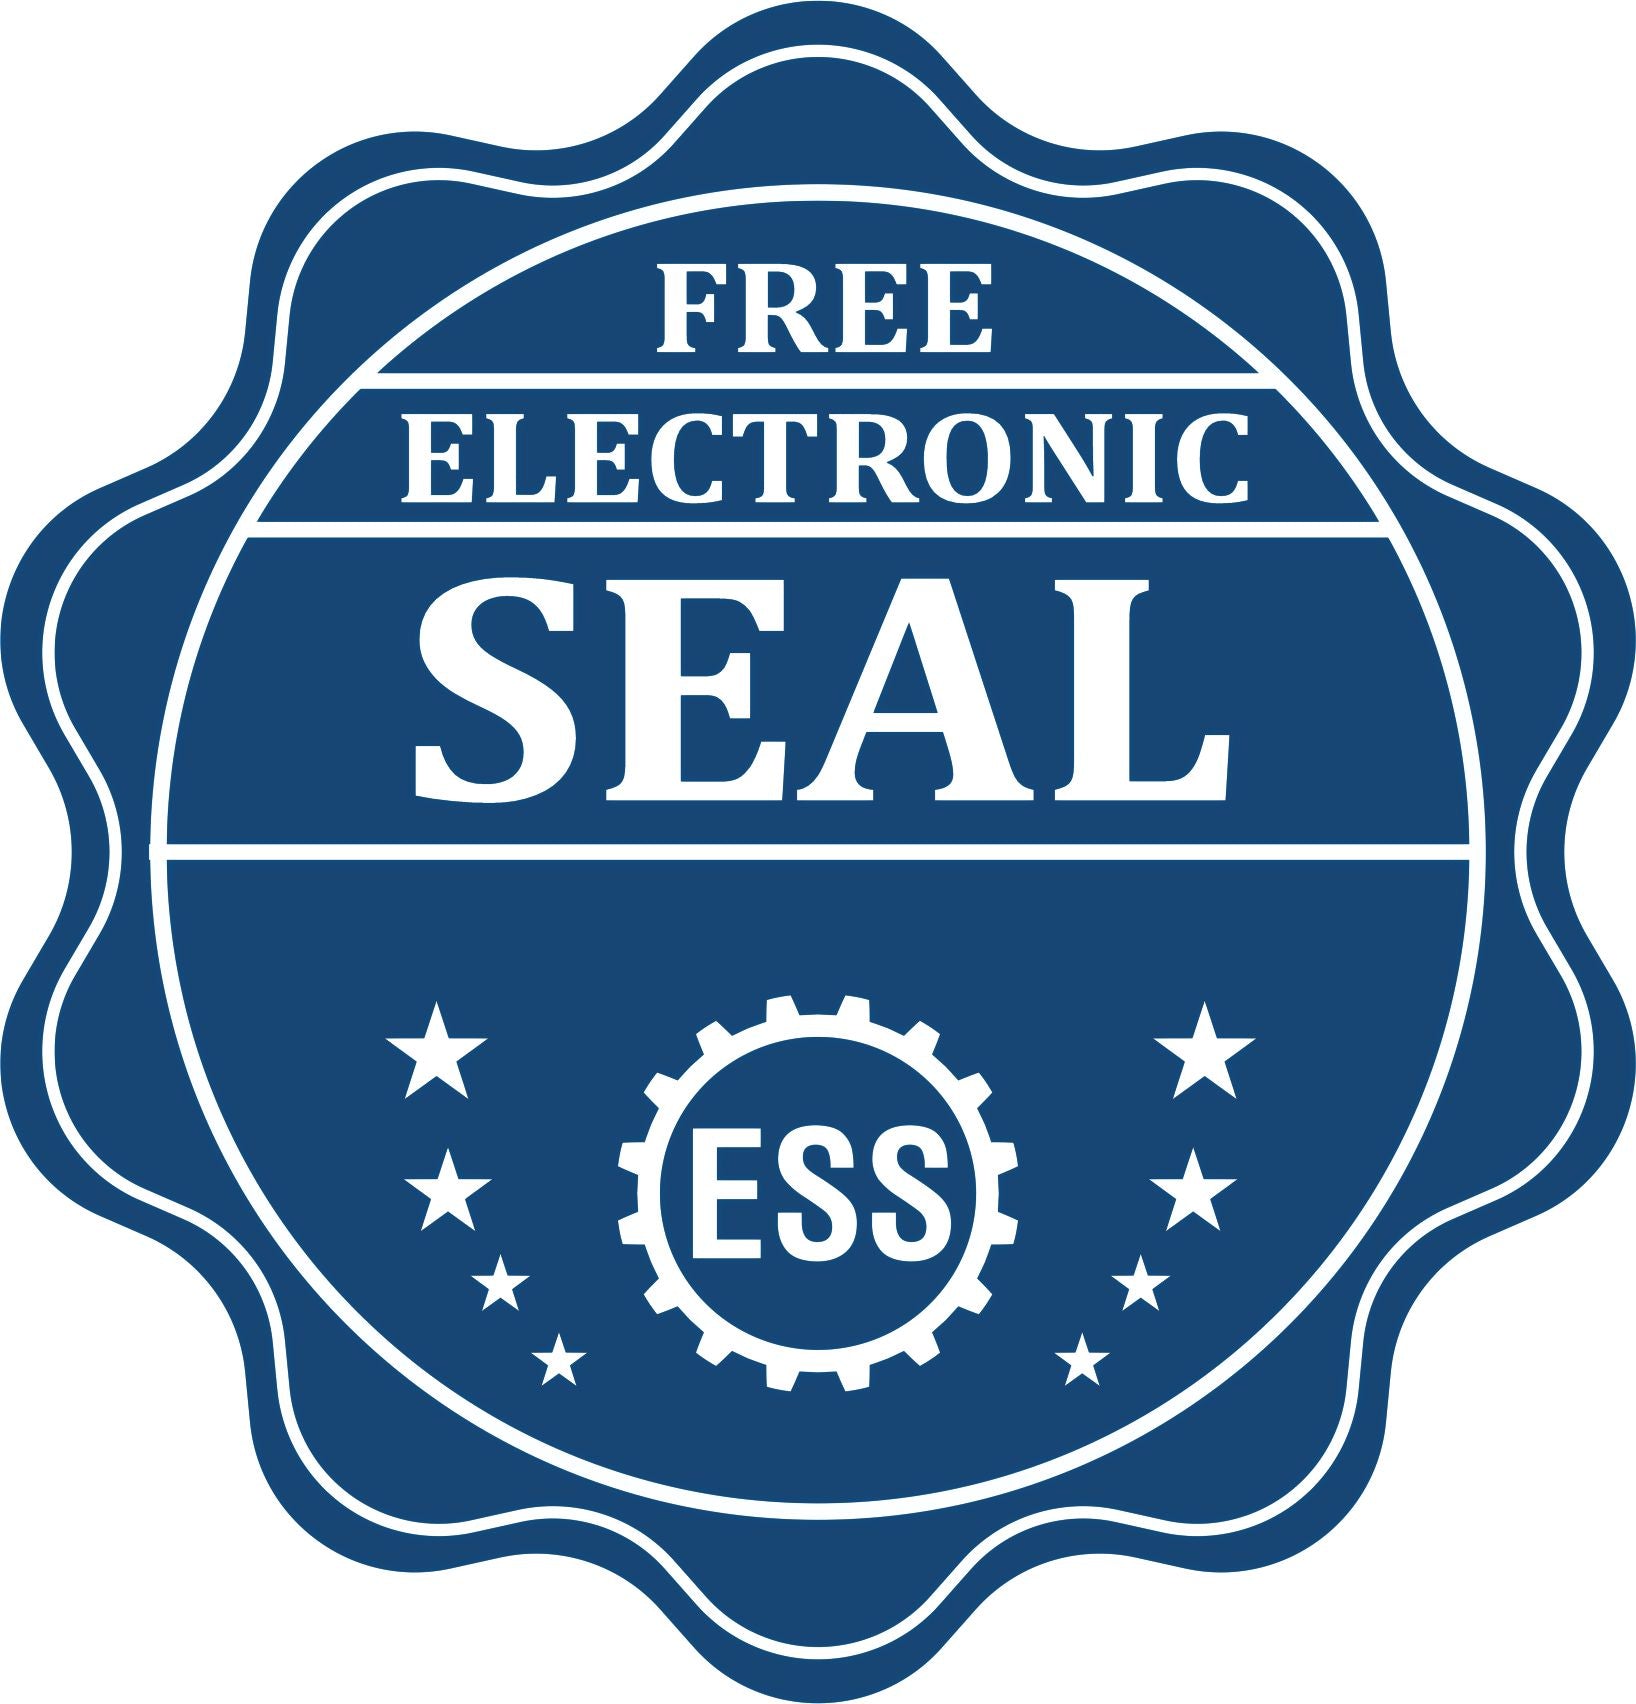 A badge showing a free electronic seal for the Handheld Maryland Land Surveyor Seal with stars and the ESS gear on the emblem.